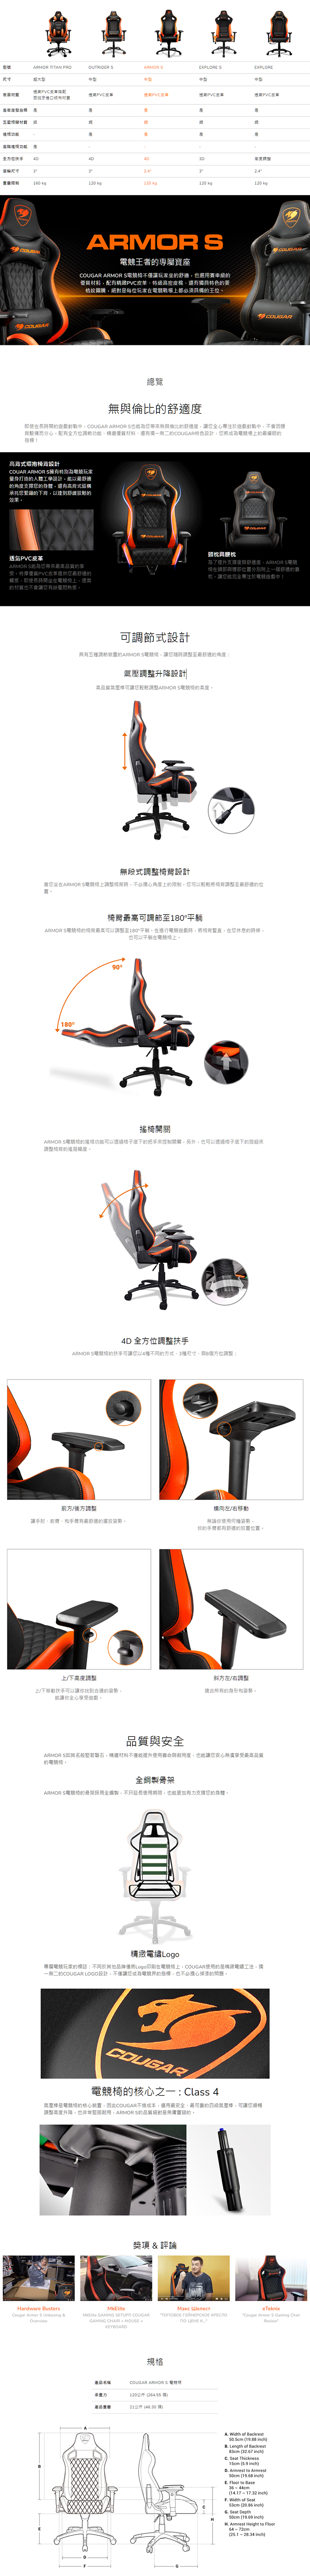 Cougar Armor S gaming chair 